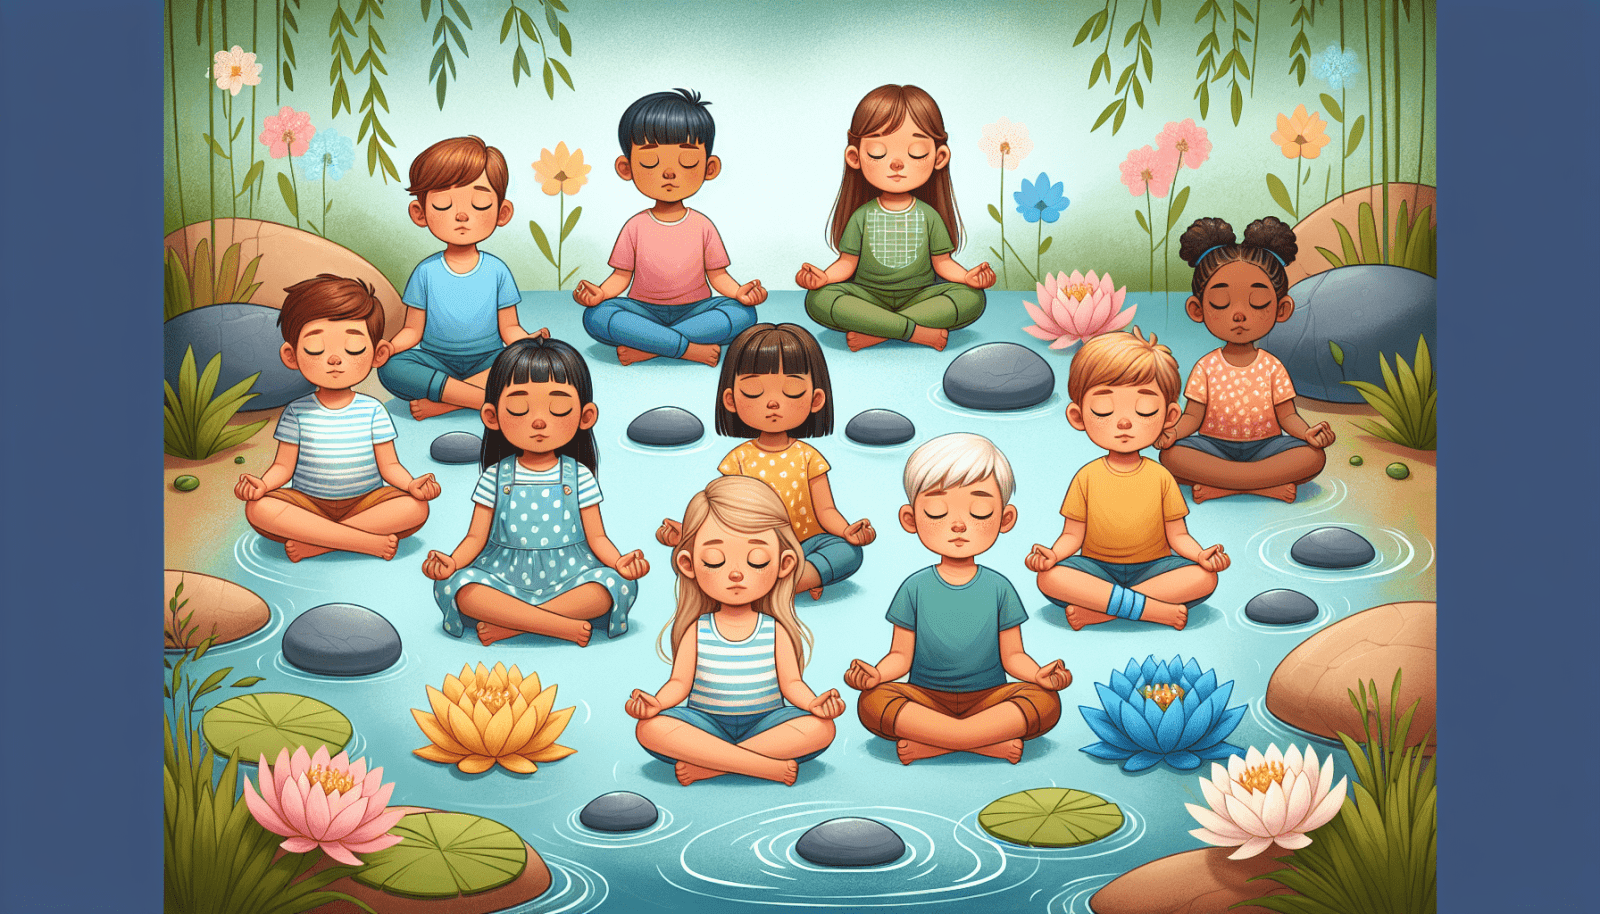 Illustration of eleven diverse children meditating peacefully on stones across a serene pond adorned with blooming lotus flowers and surrounded by lush greenery.